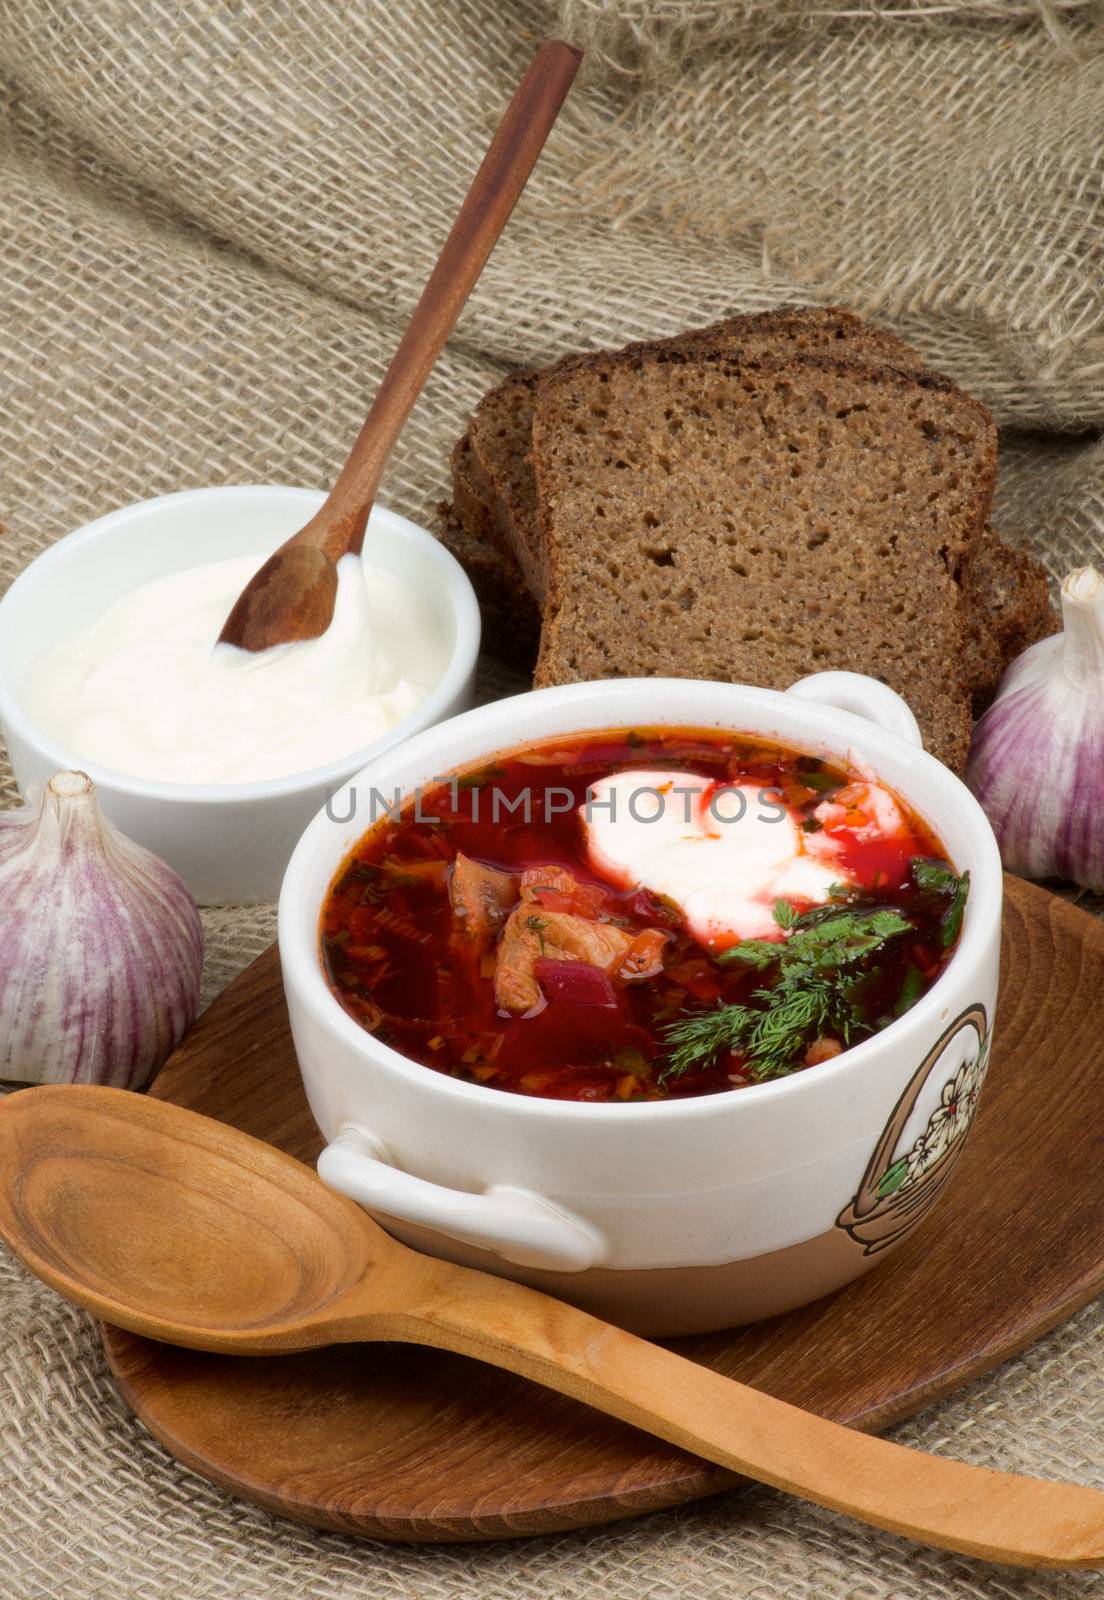 Arrangement of Traditional Soup with Beet, Vegetables, Meat and Brown Bread, Garlic and Sour Cream on Wooden Plate with Wooden Spoon